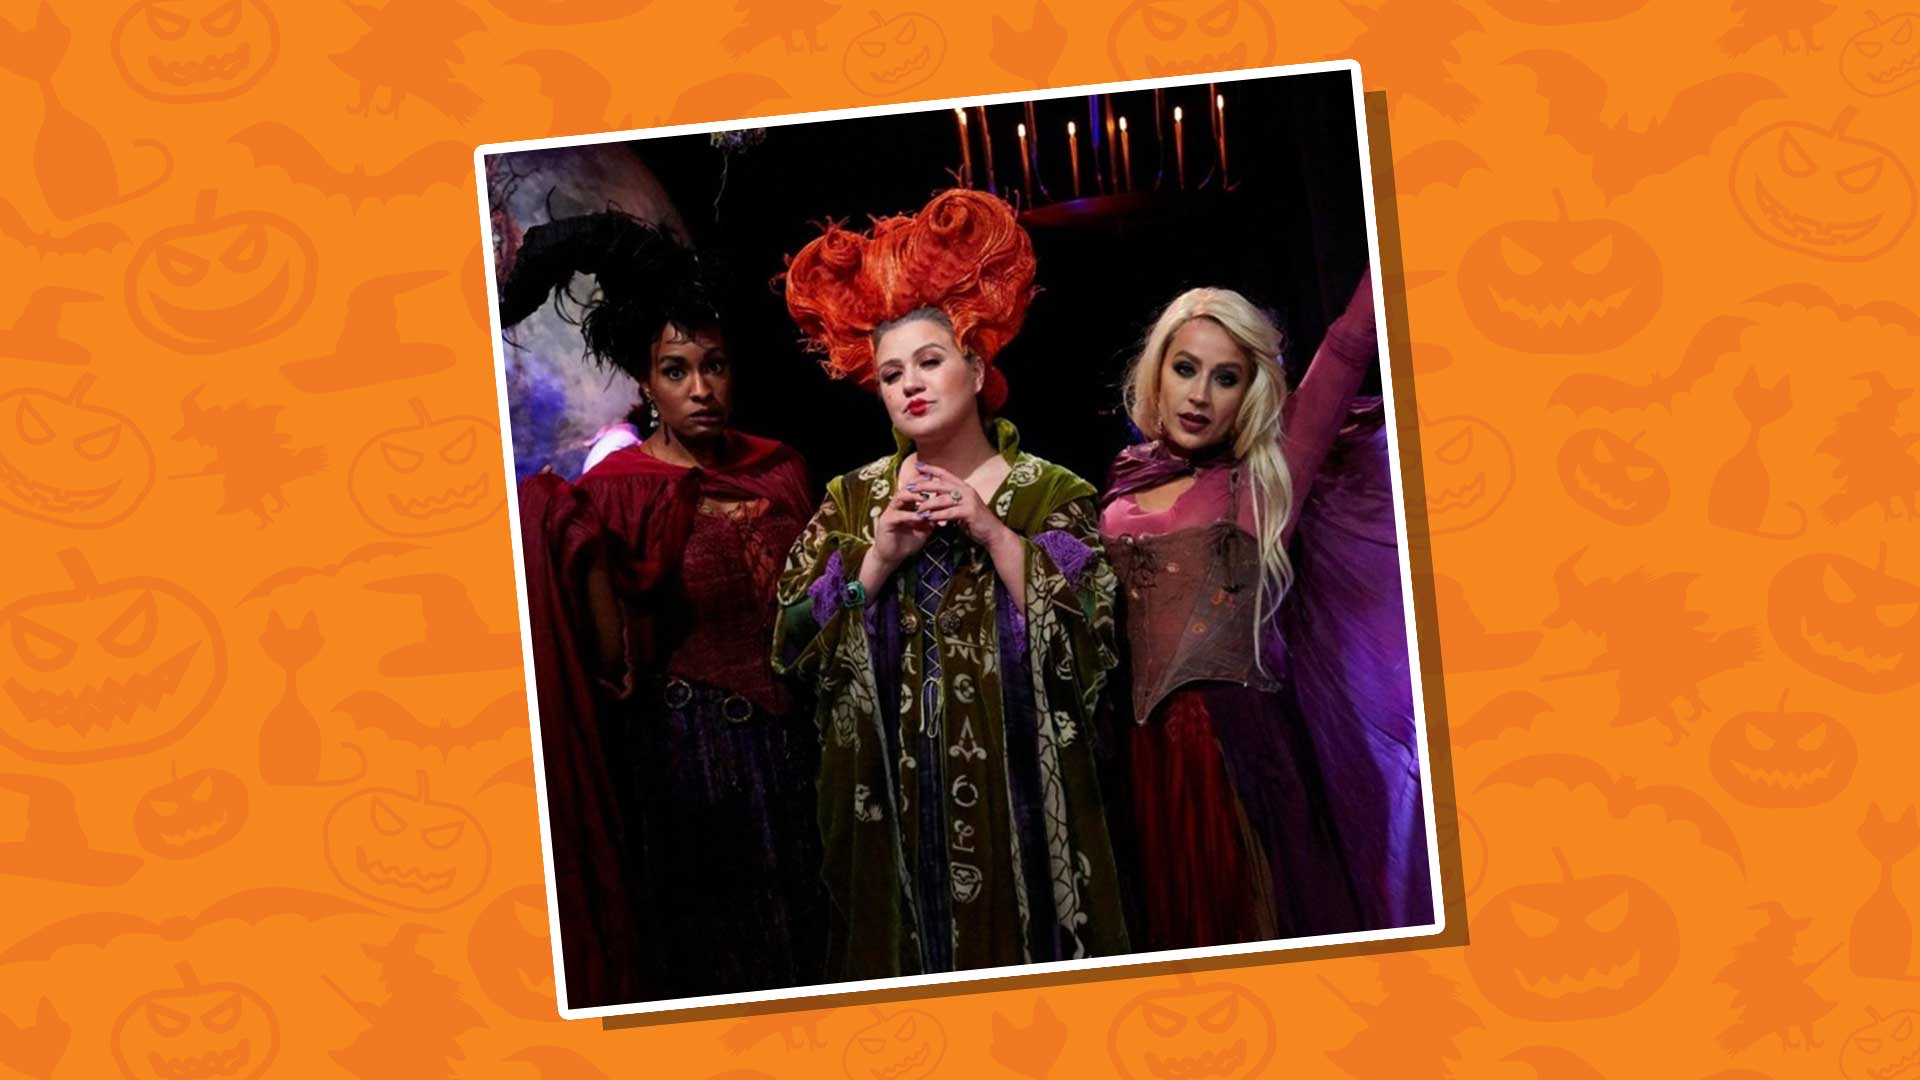 Three people dressed as characters from Hocus Pocus